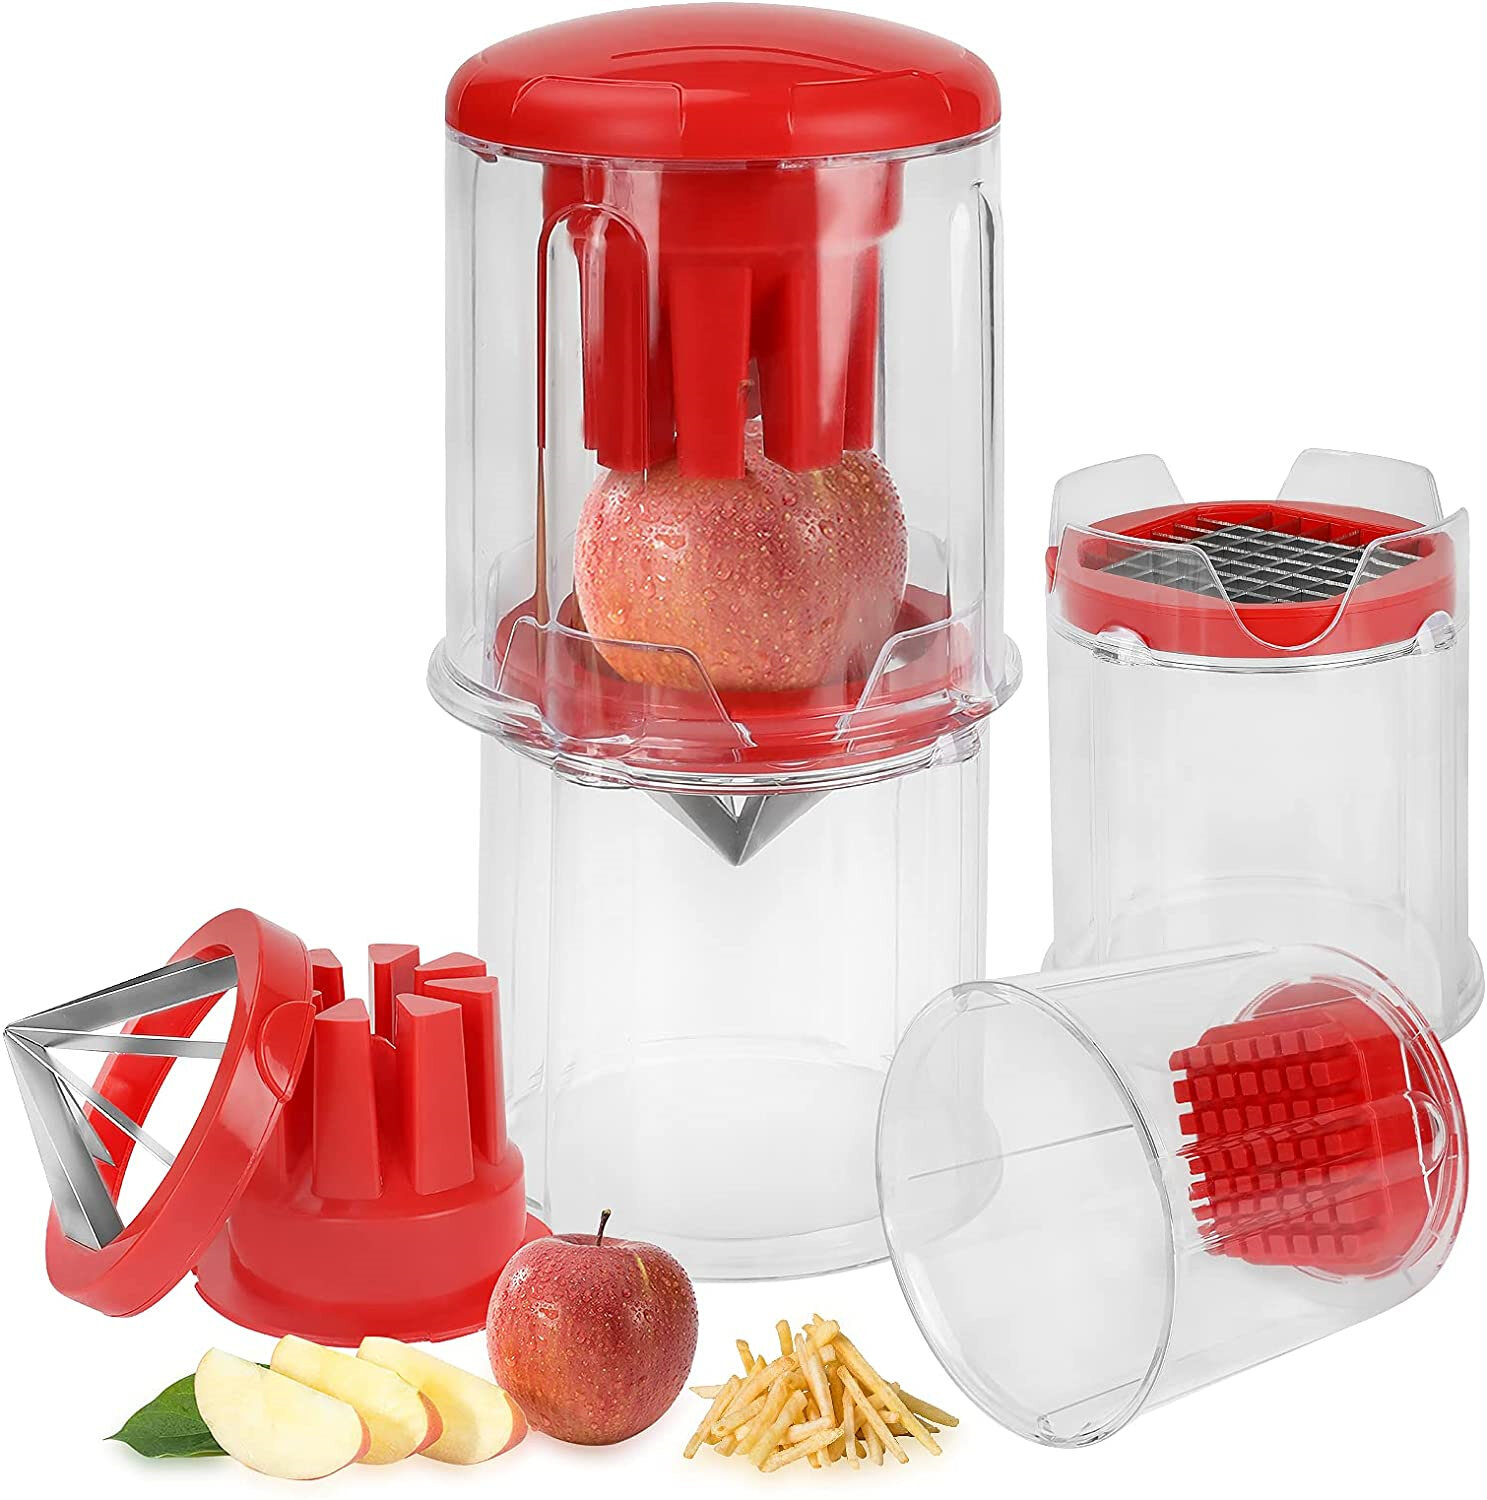 With Container French Fry Cutter Perfect for Air Fryer Dishwasher Safe Easy to Clean Super Sharp Blades Onion Chopper Vegetable Slicer Apple Cutter